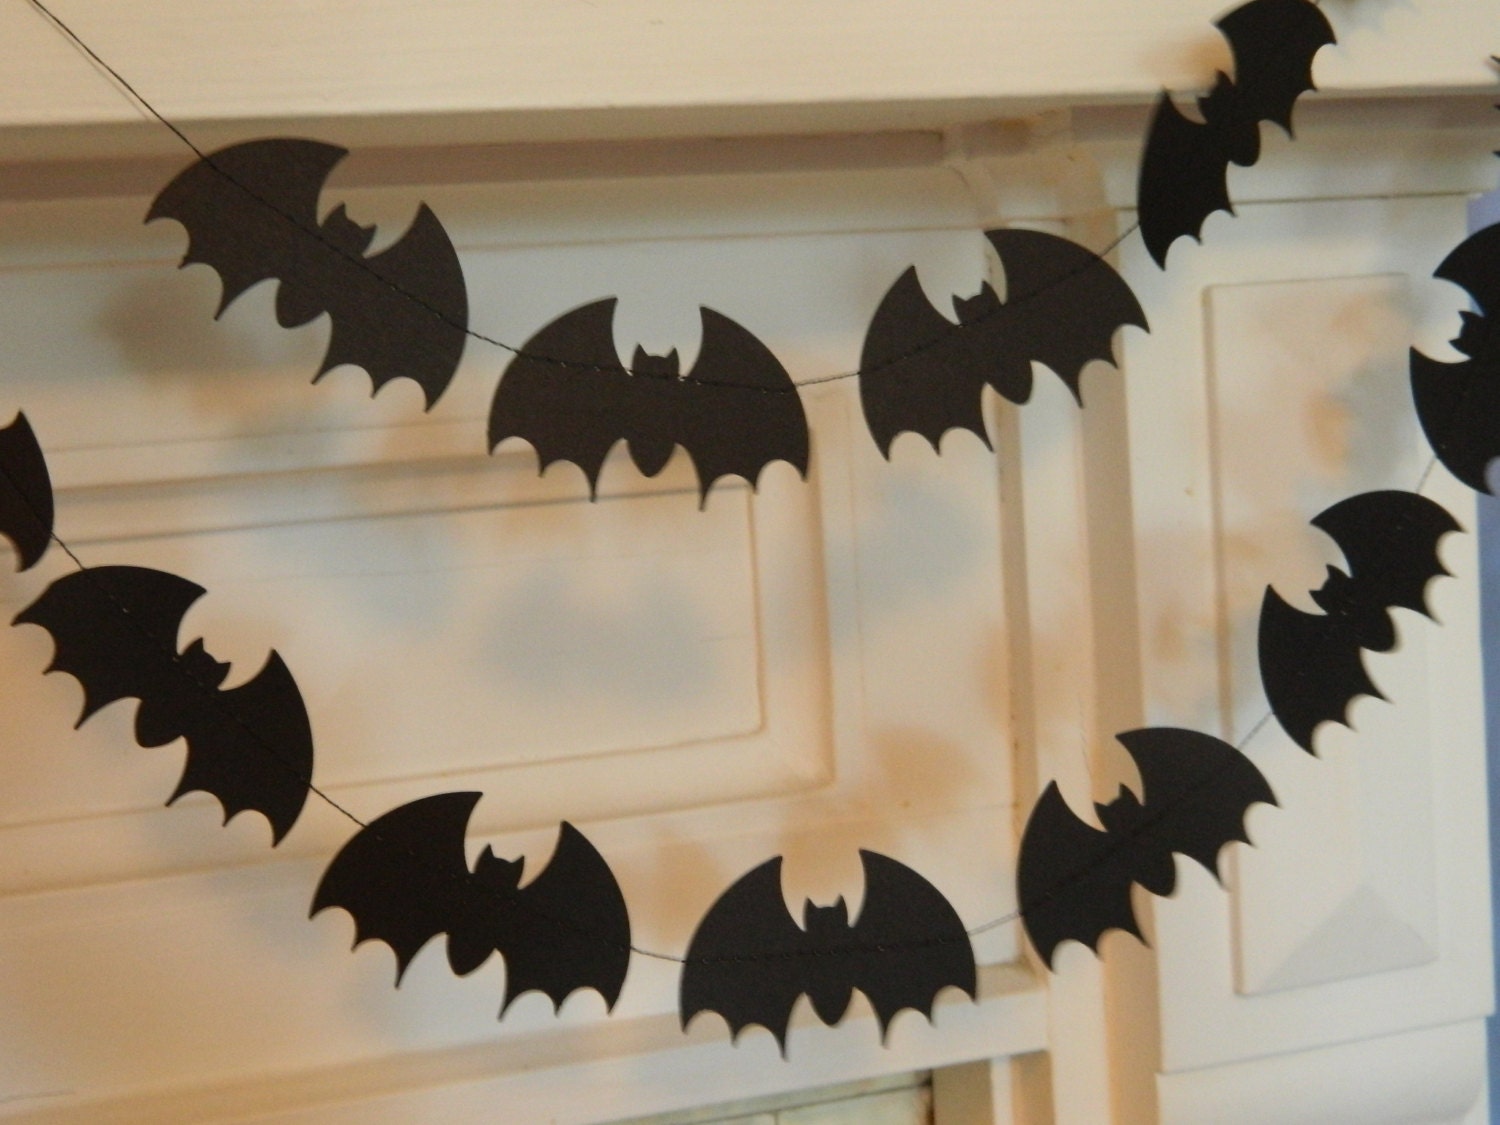 32 Top Pictures How To Make Bat Decorations / Halloween crafts for kids - 19 upcycled toilet paper rolls ...